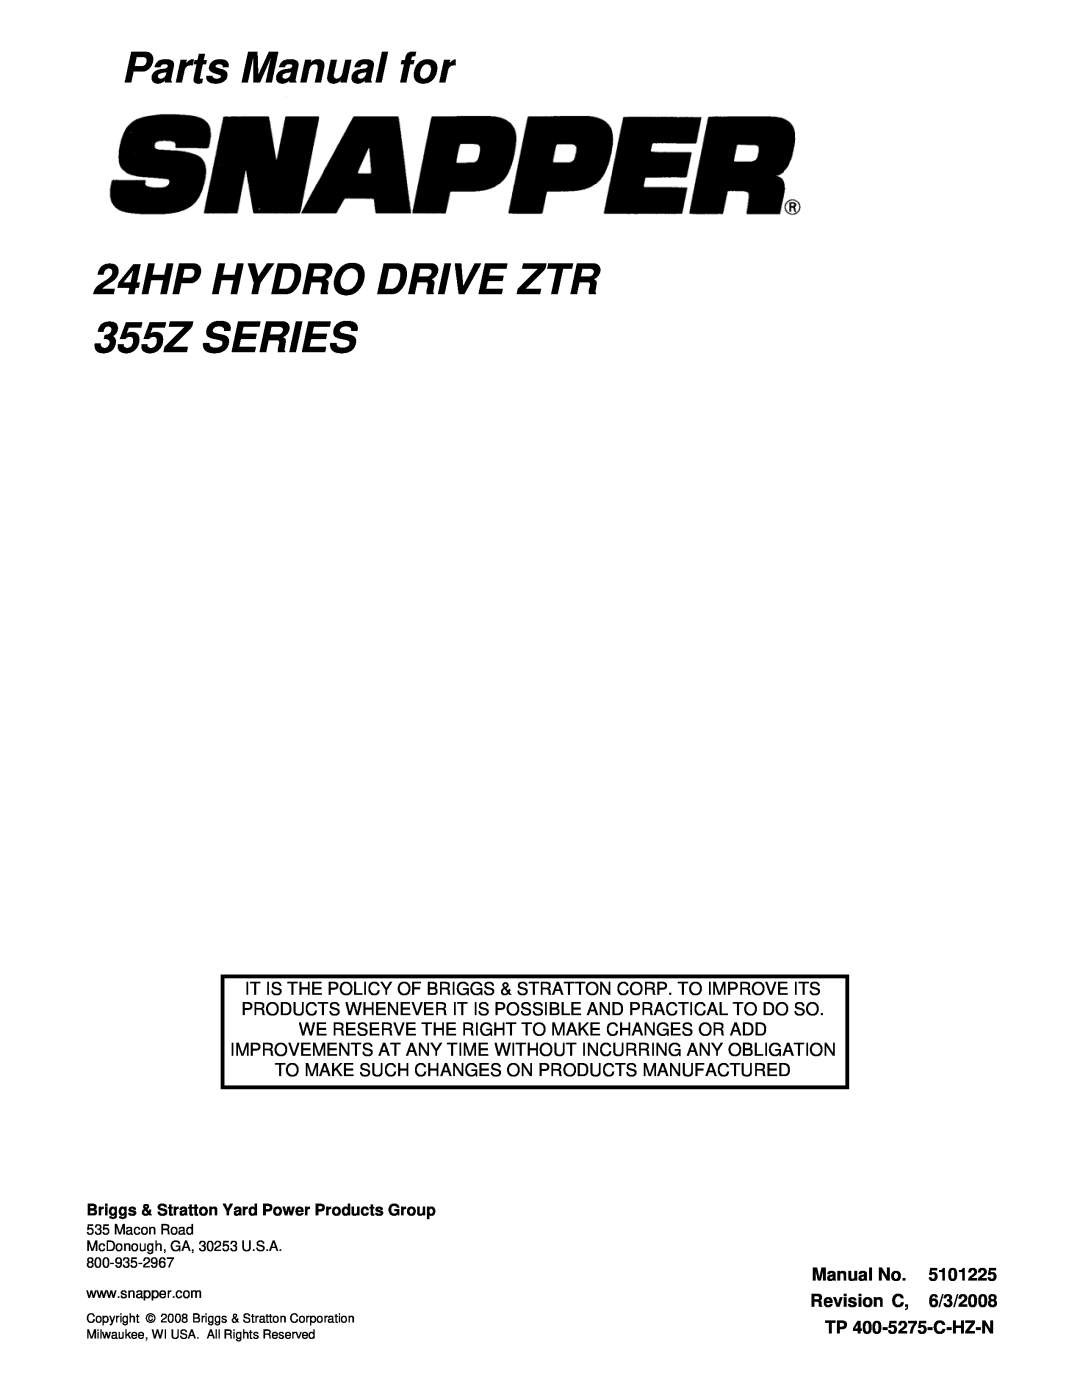 Snapper Parts Manual for 24HP HYDRO DRIVE ZTR 355Z SERIES, Manual No, 5101225, Revision C, 6/3/2008, TP 400-5275-C-HZ-N 